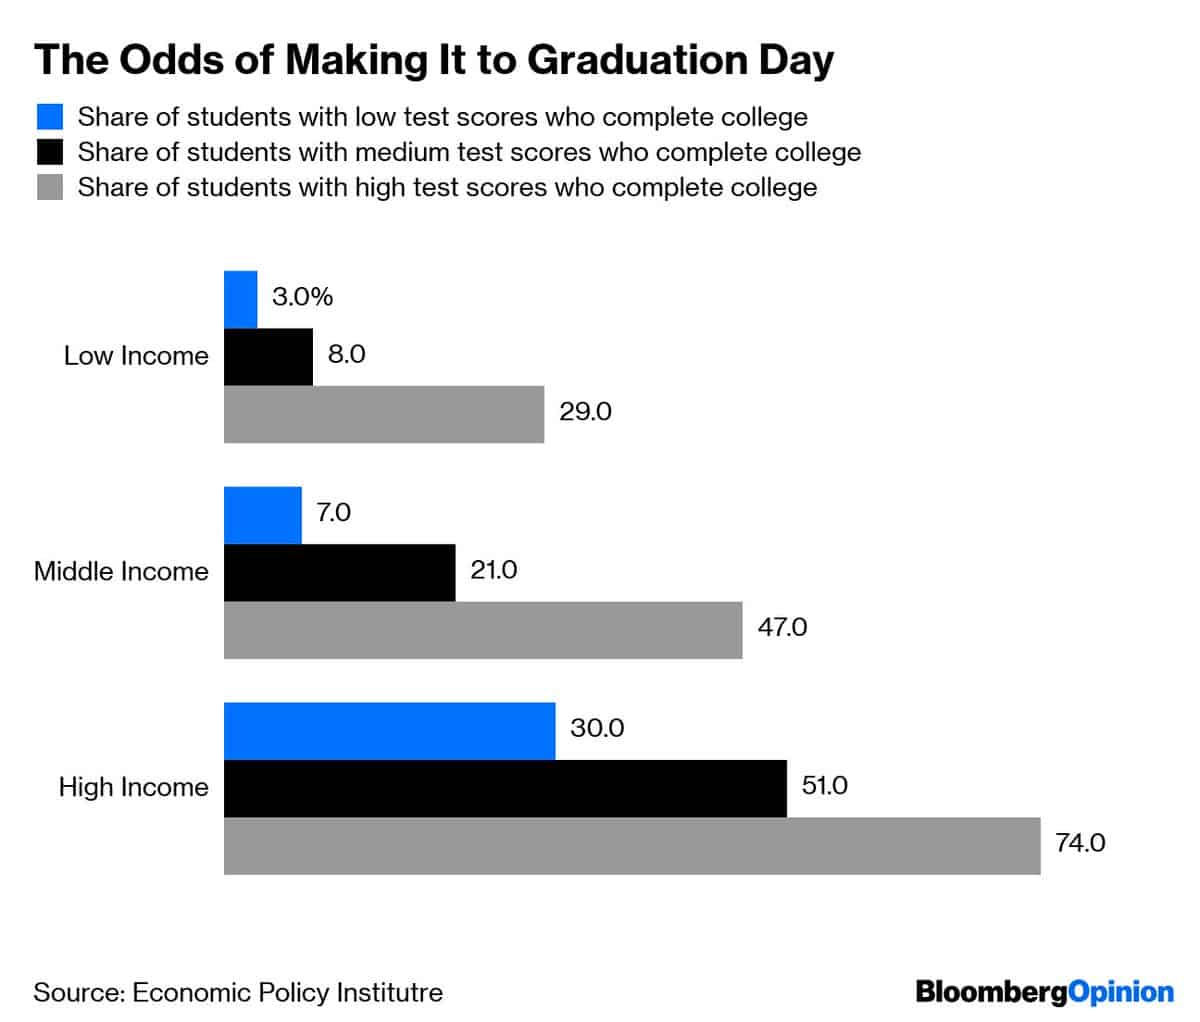 Chart showing the odds of making it to graduation day broken out by income and ability level of the student.